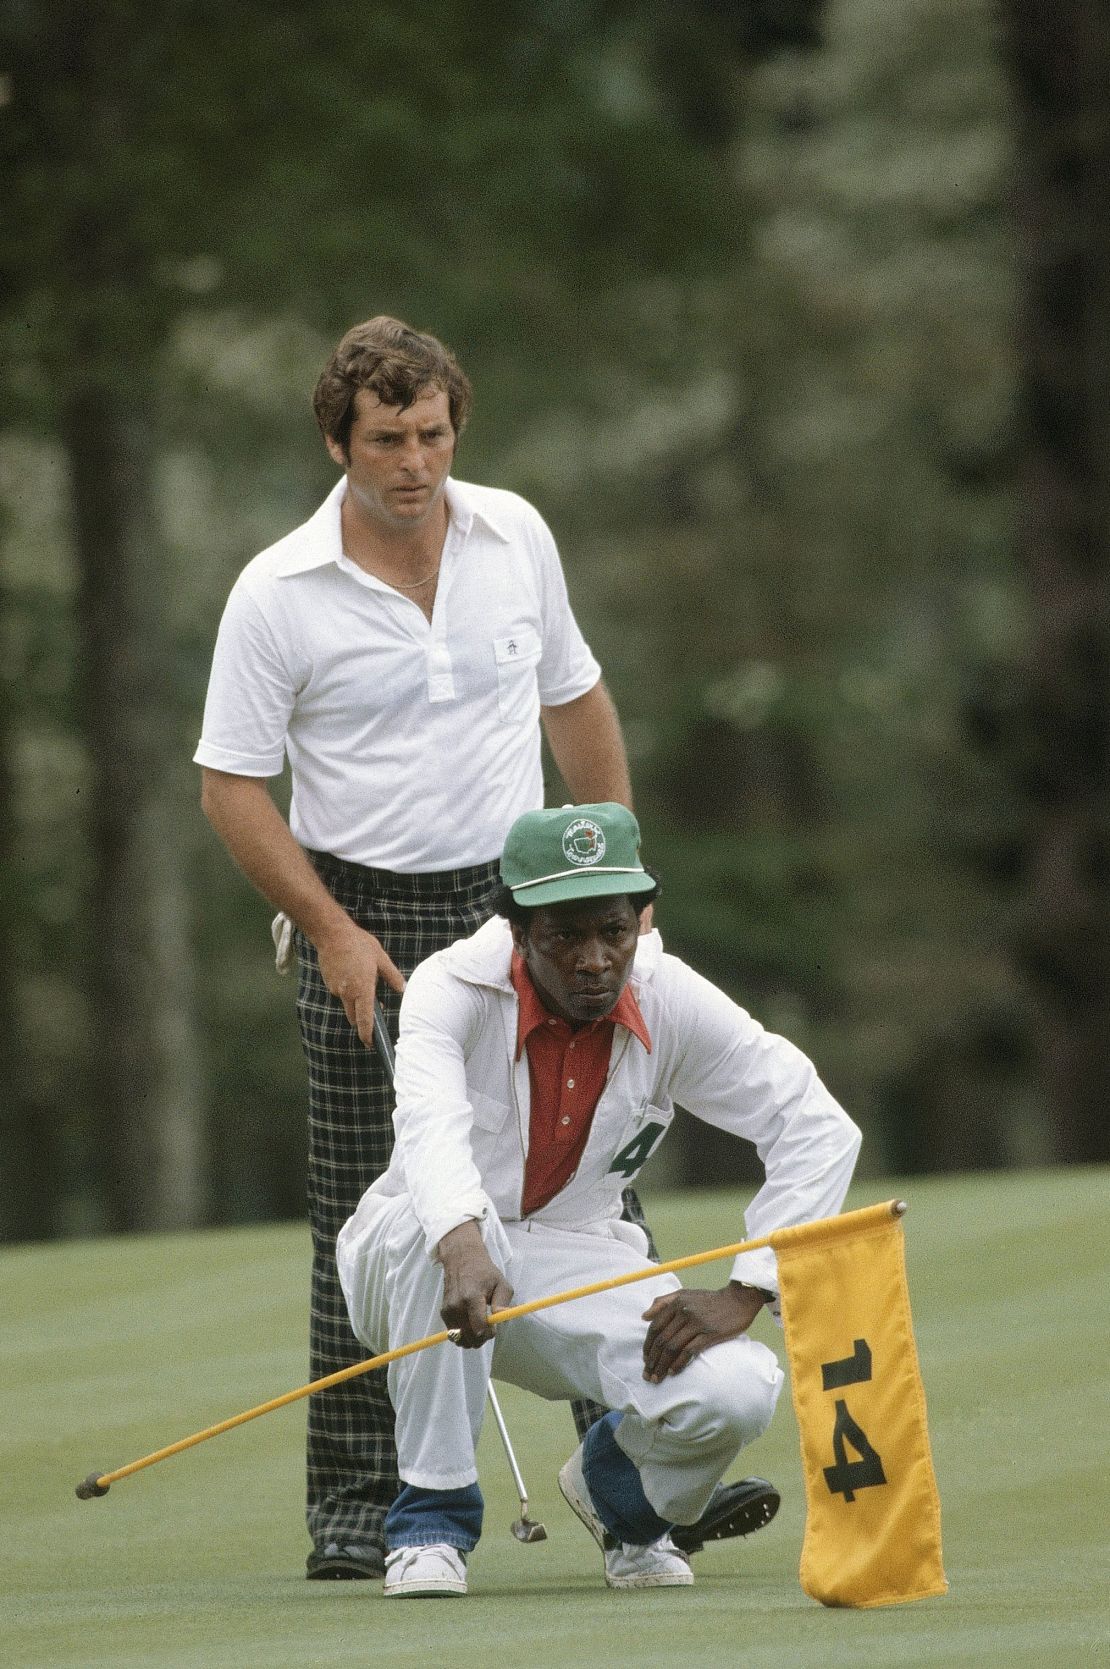 Beard helps Zoeller line up a putt at the 1979 Masters.